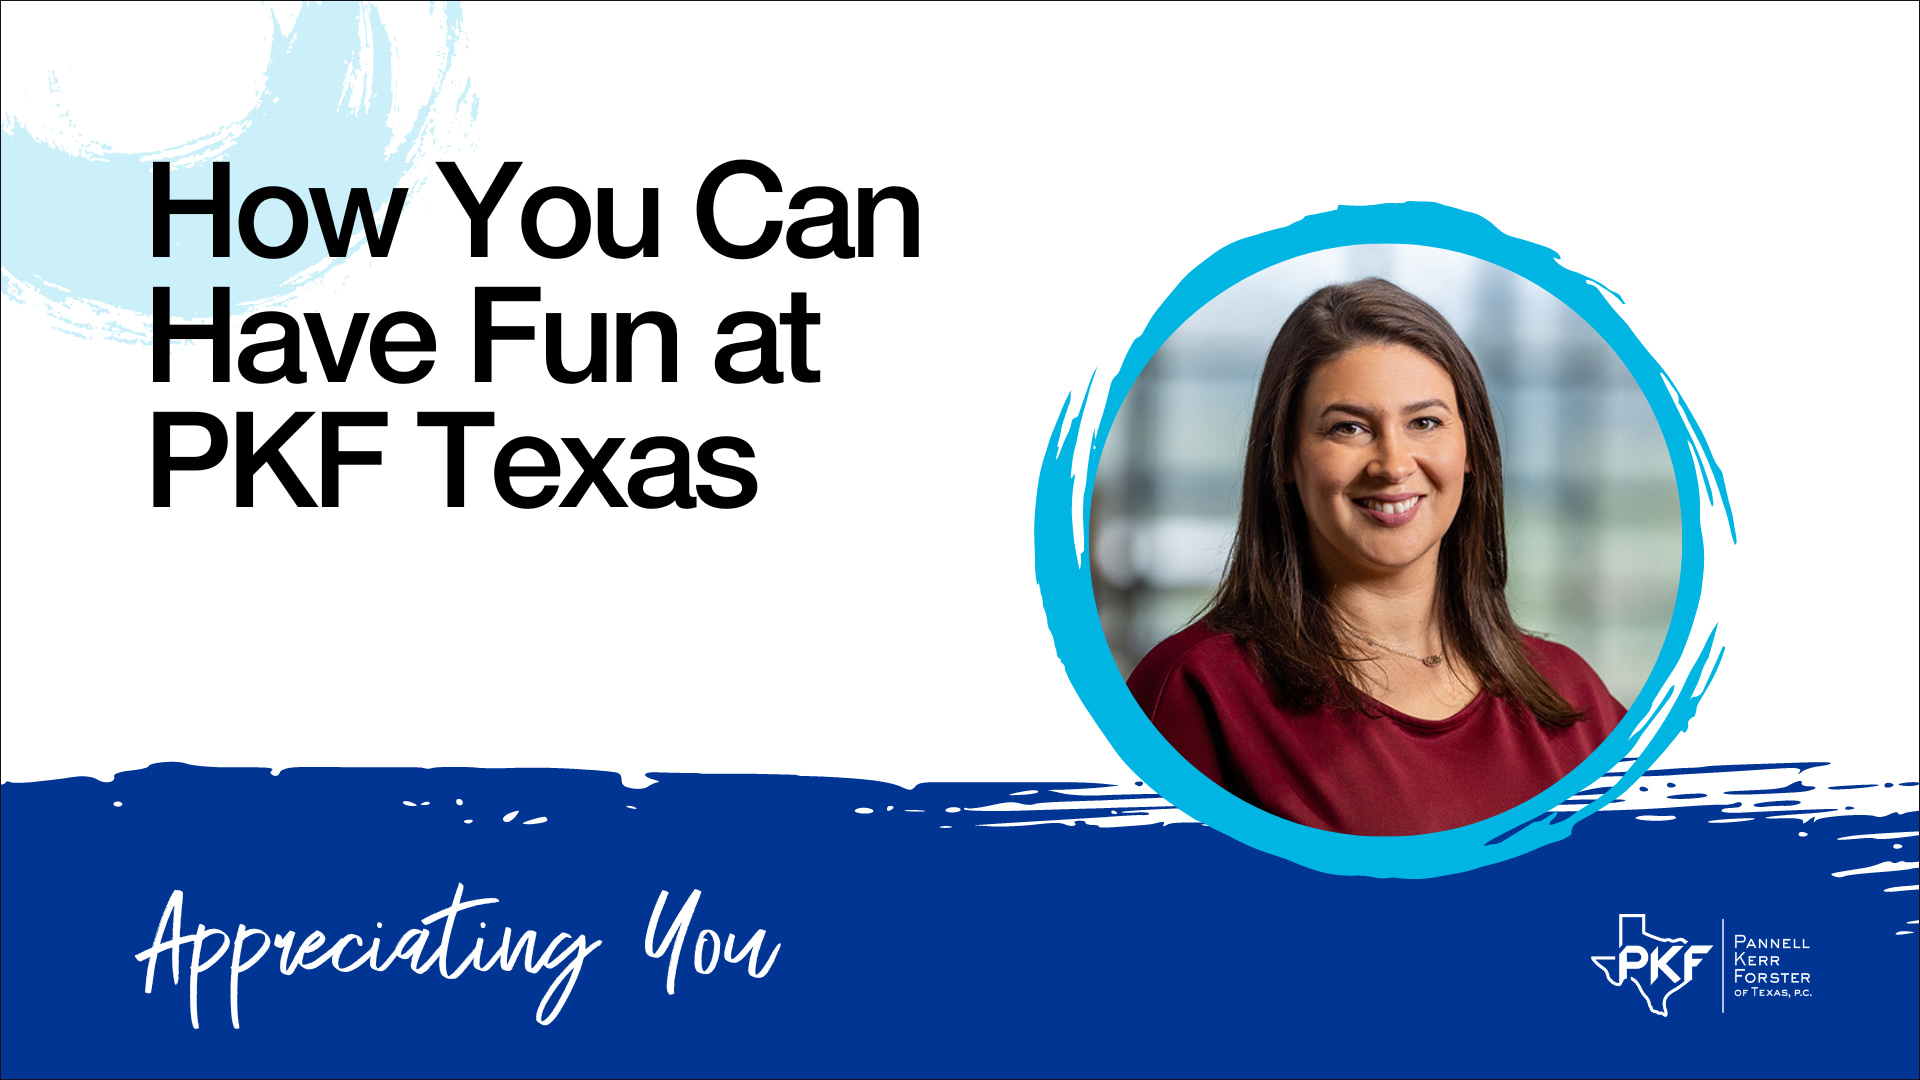 A video thumbnail image for "How You Can Have Fun at PKF Texas."